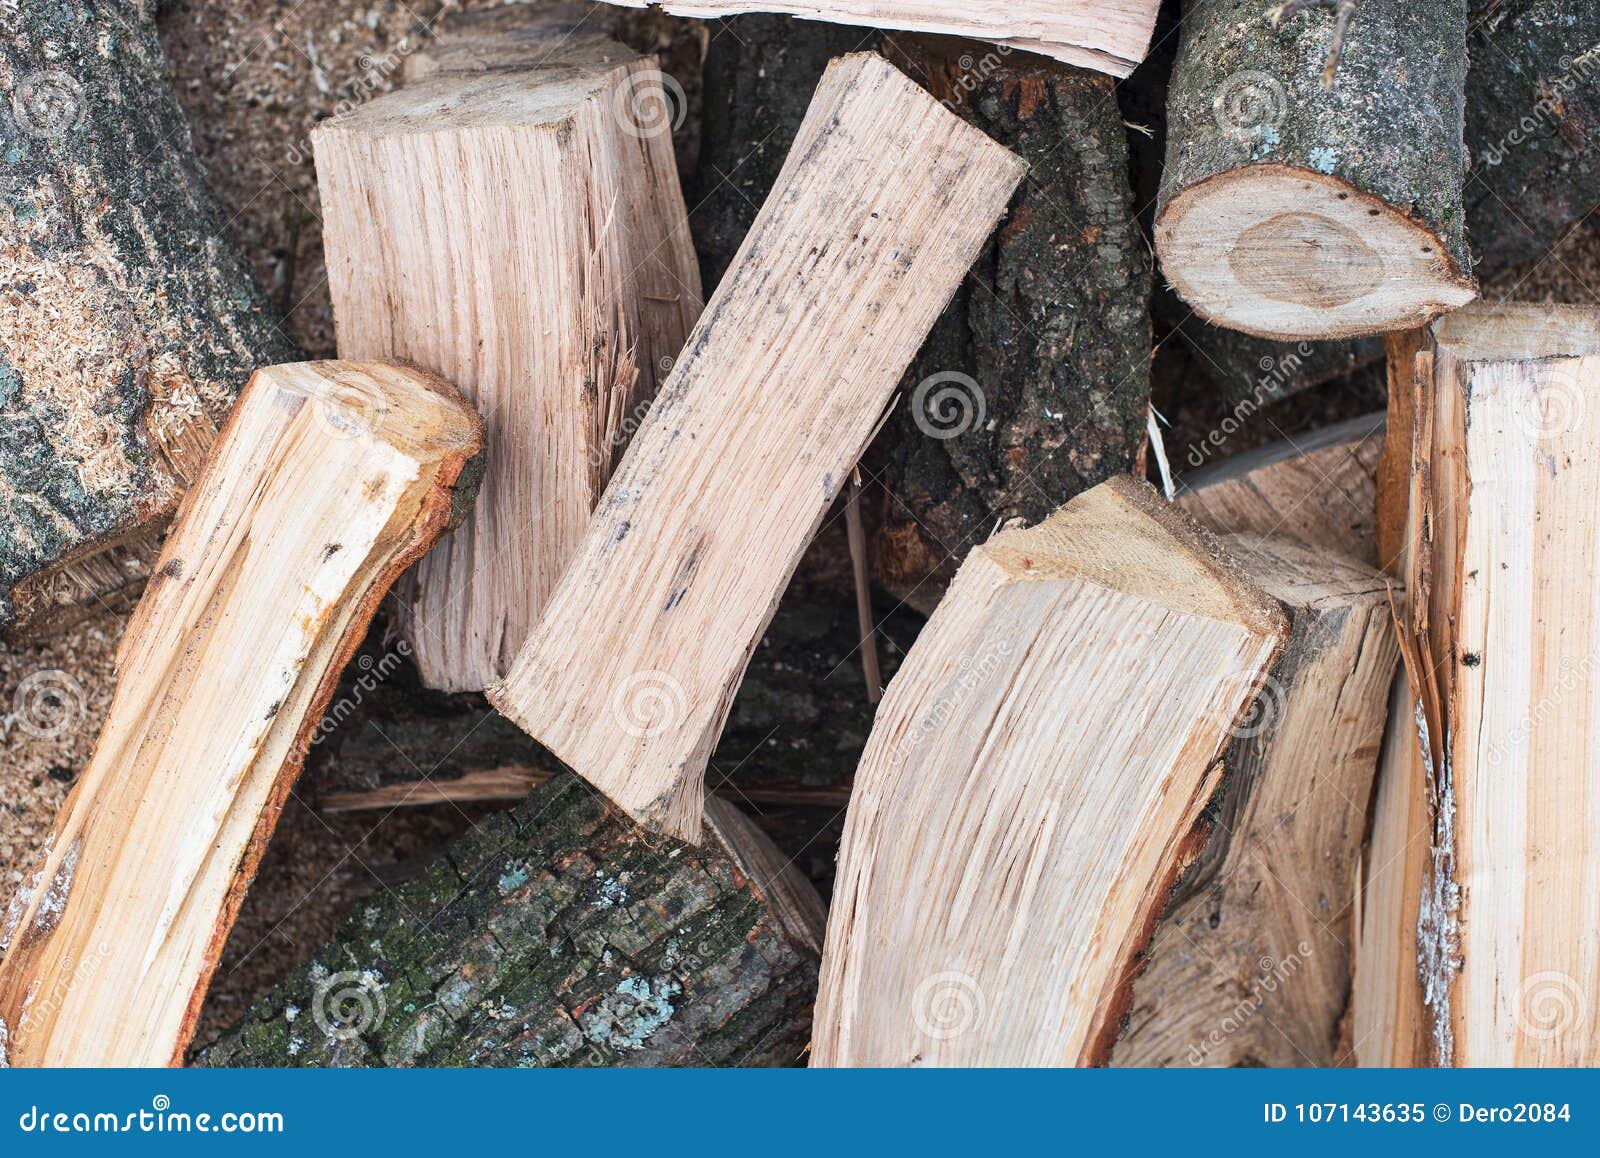 Oak Firewood Wooden Sawdust Bark And Moss Top View Close Up Preparing For The Heating Season Stock Image Image Of Home Ukraine 107143635